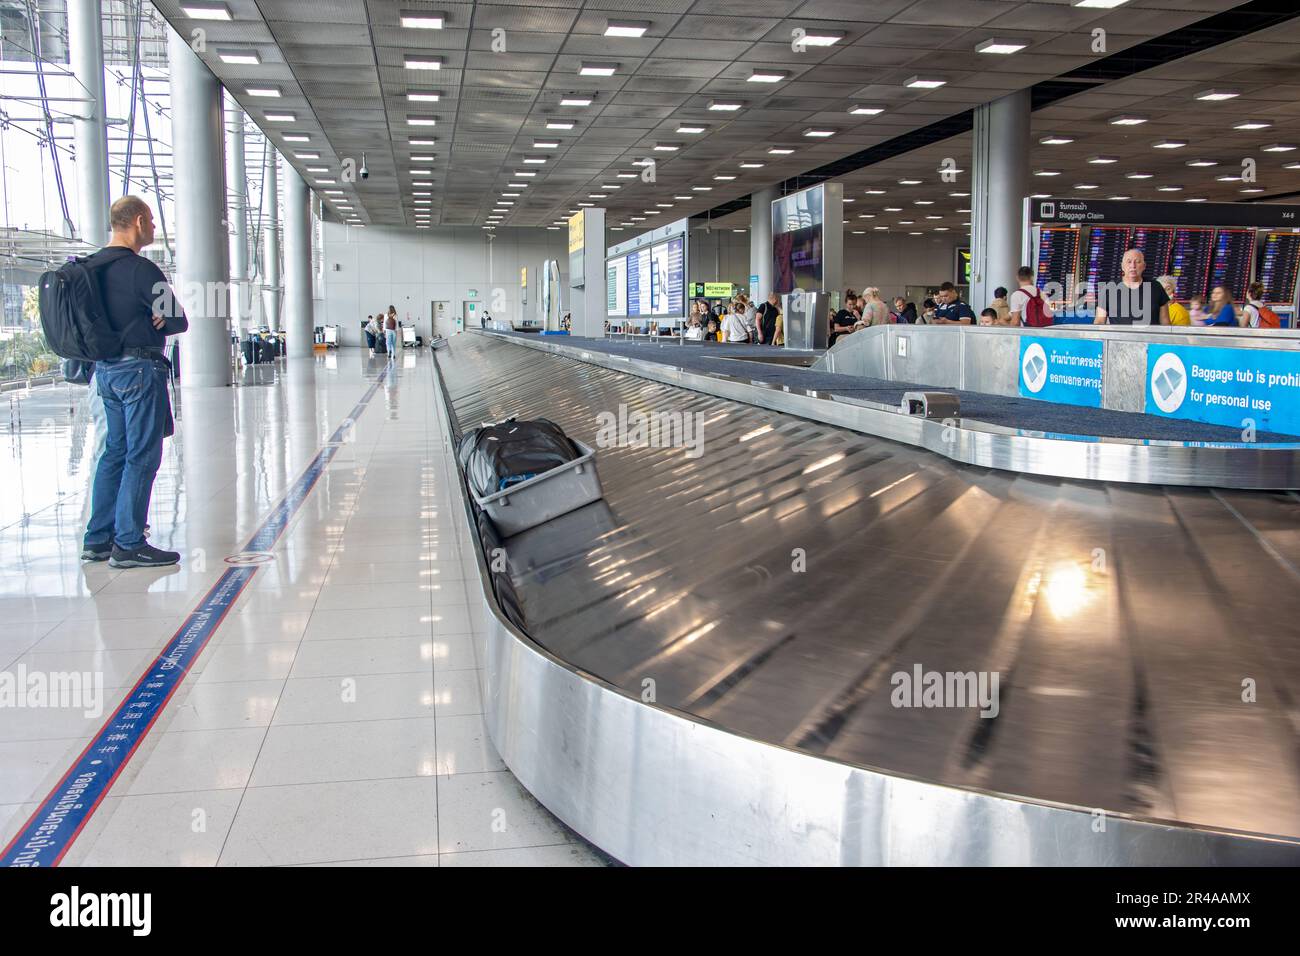 BANGKOK, THAILAND, JAN 20 2023, Passengers are waiting for their luggage on the conveyor in the arrivals hall of the airport Stock Photo